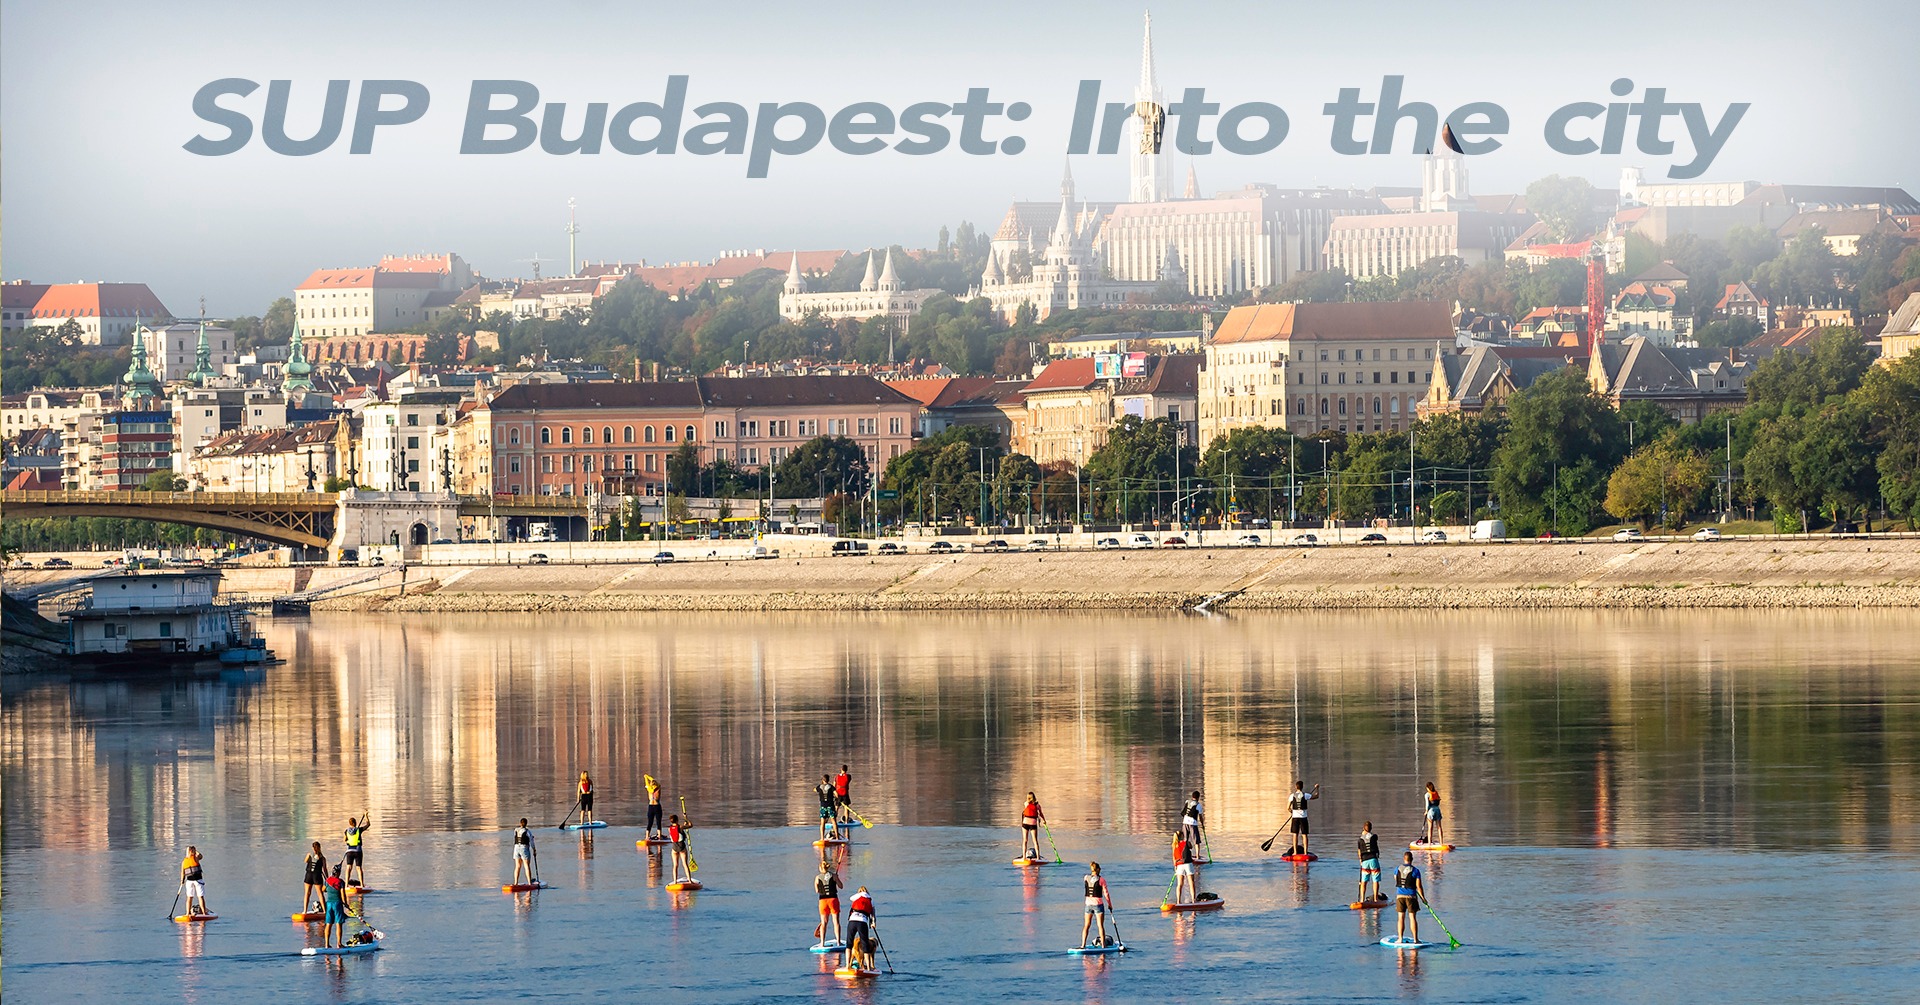 SUP Budapest: Into the City, Budapest, 18 August